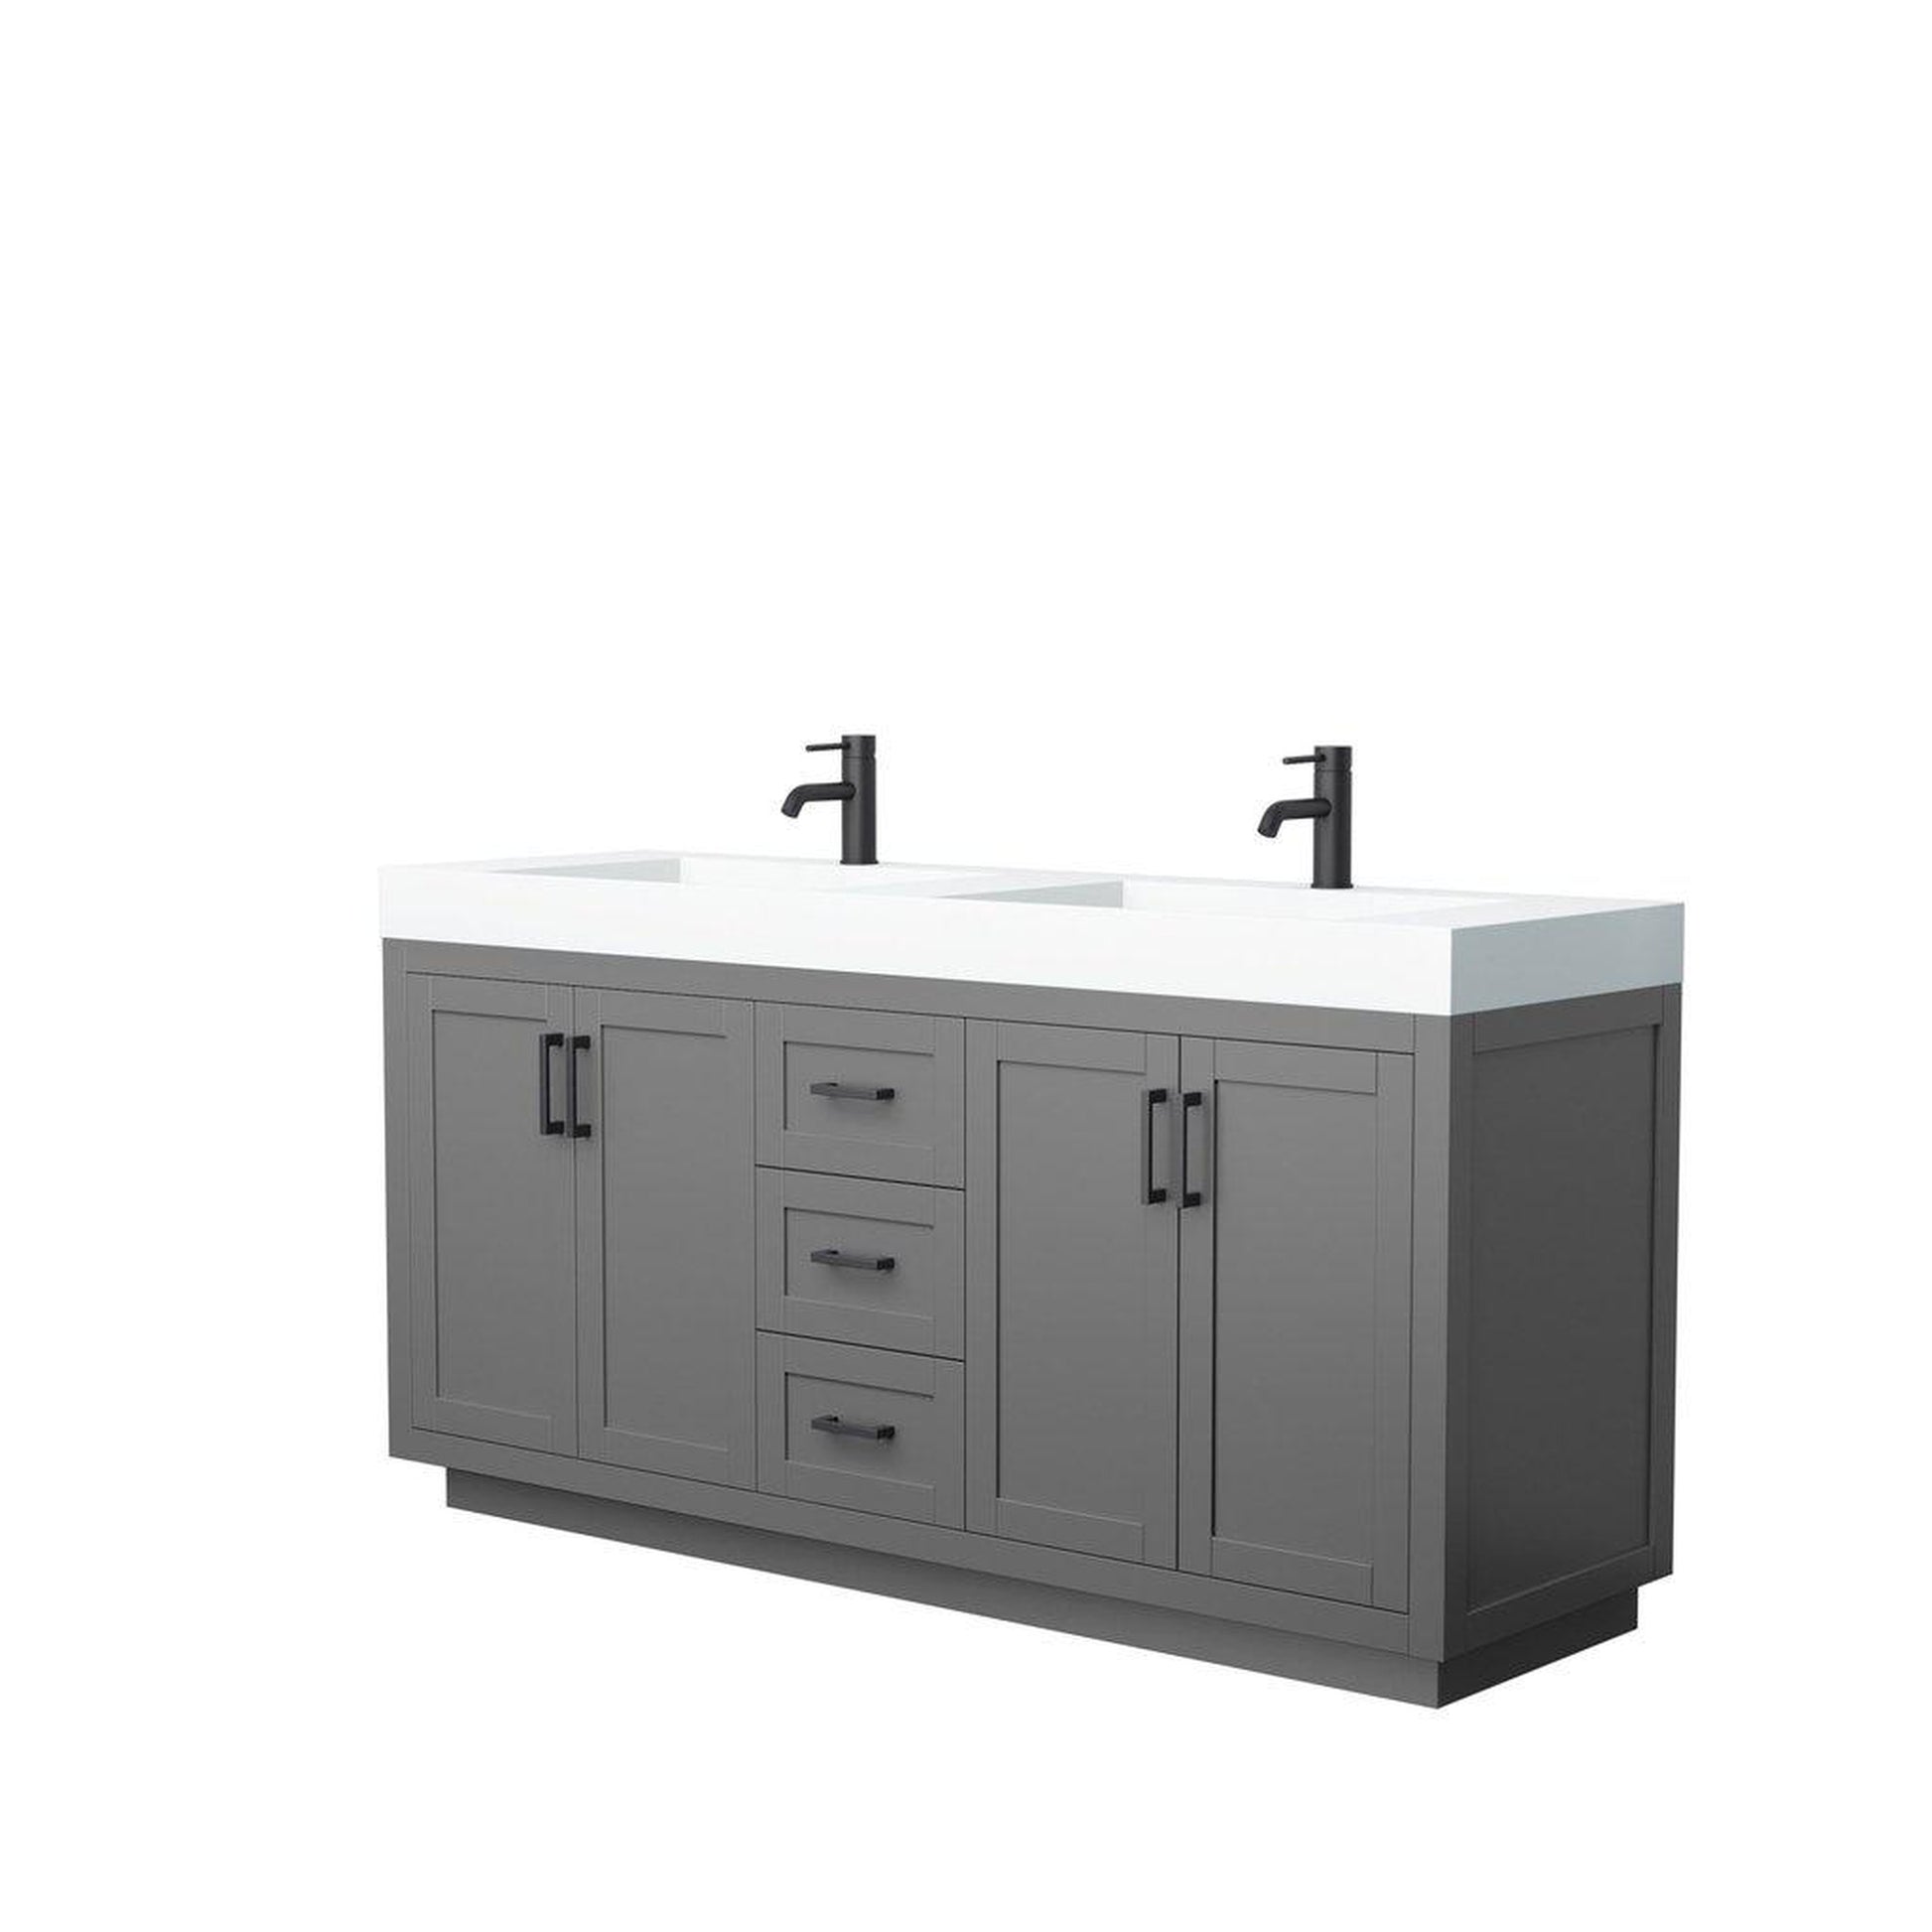 Wyndham Collection Miranda 72" Double Bathroom Dark Gray Vanity Set With 4" Thick Matte White Solid Surface Countertop, Integrated Sink, And Matte Black Trim